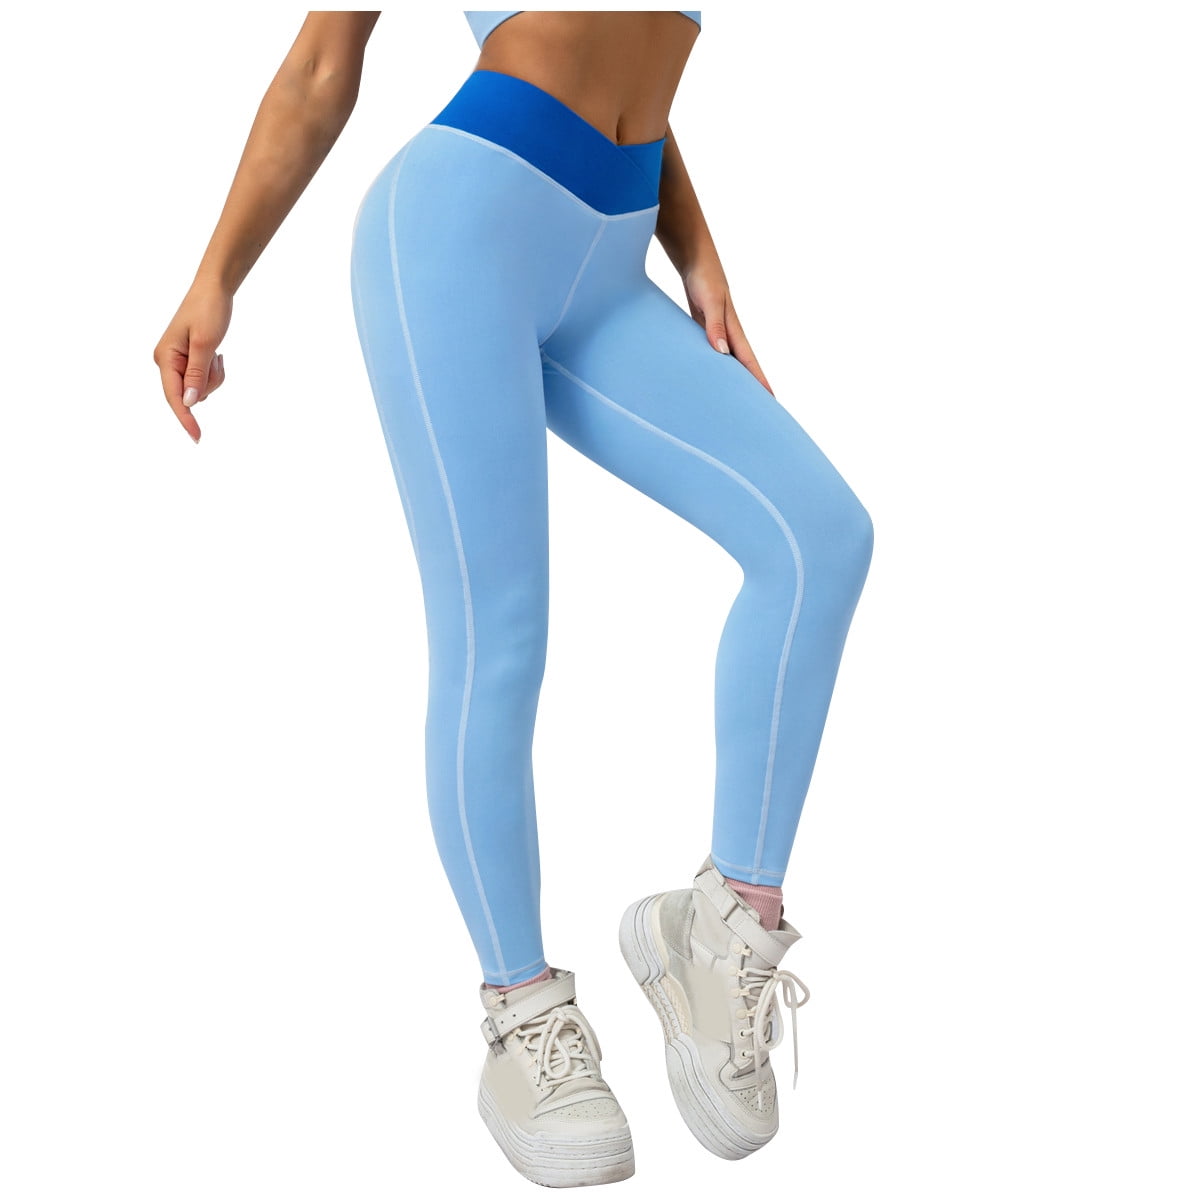 Womans Jackets Gym for Woman Sets for Women Woments Leggings Workout Sets  for Women with Pockets Womens Green One Piece Clothing Butt Lifting  Leggings